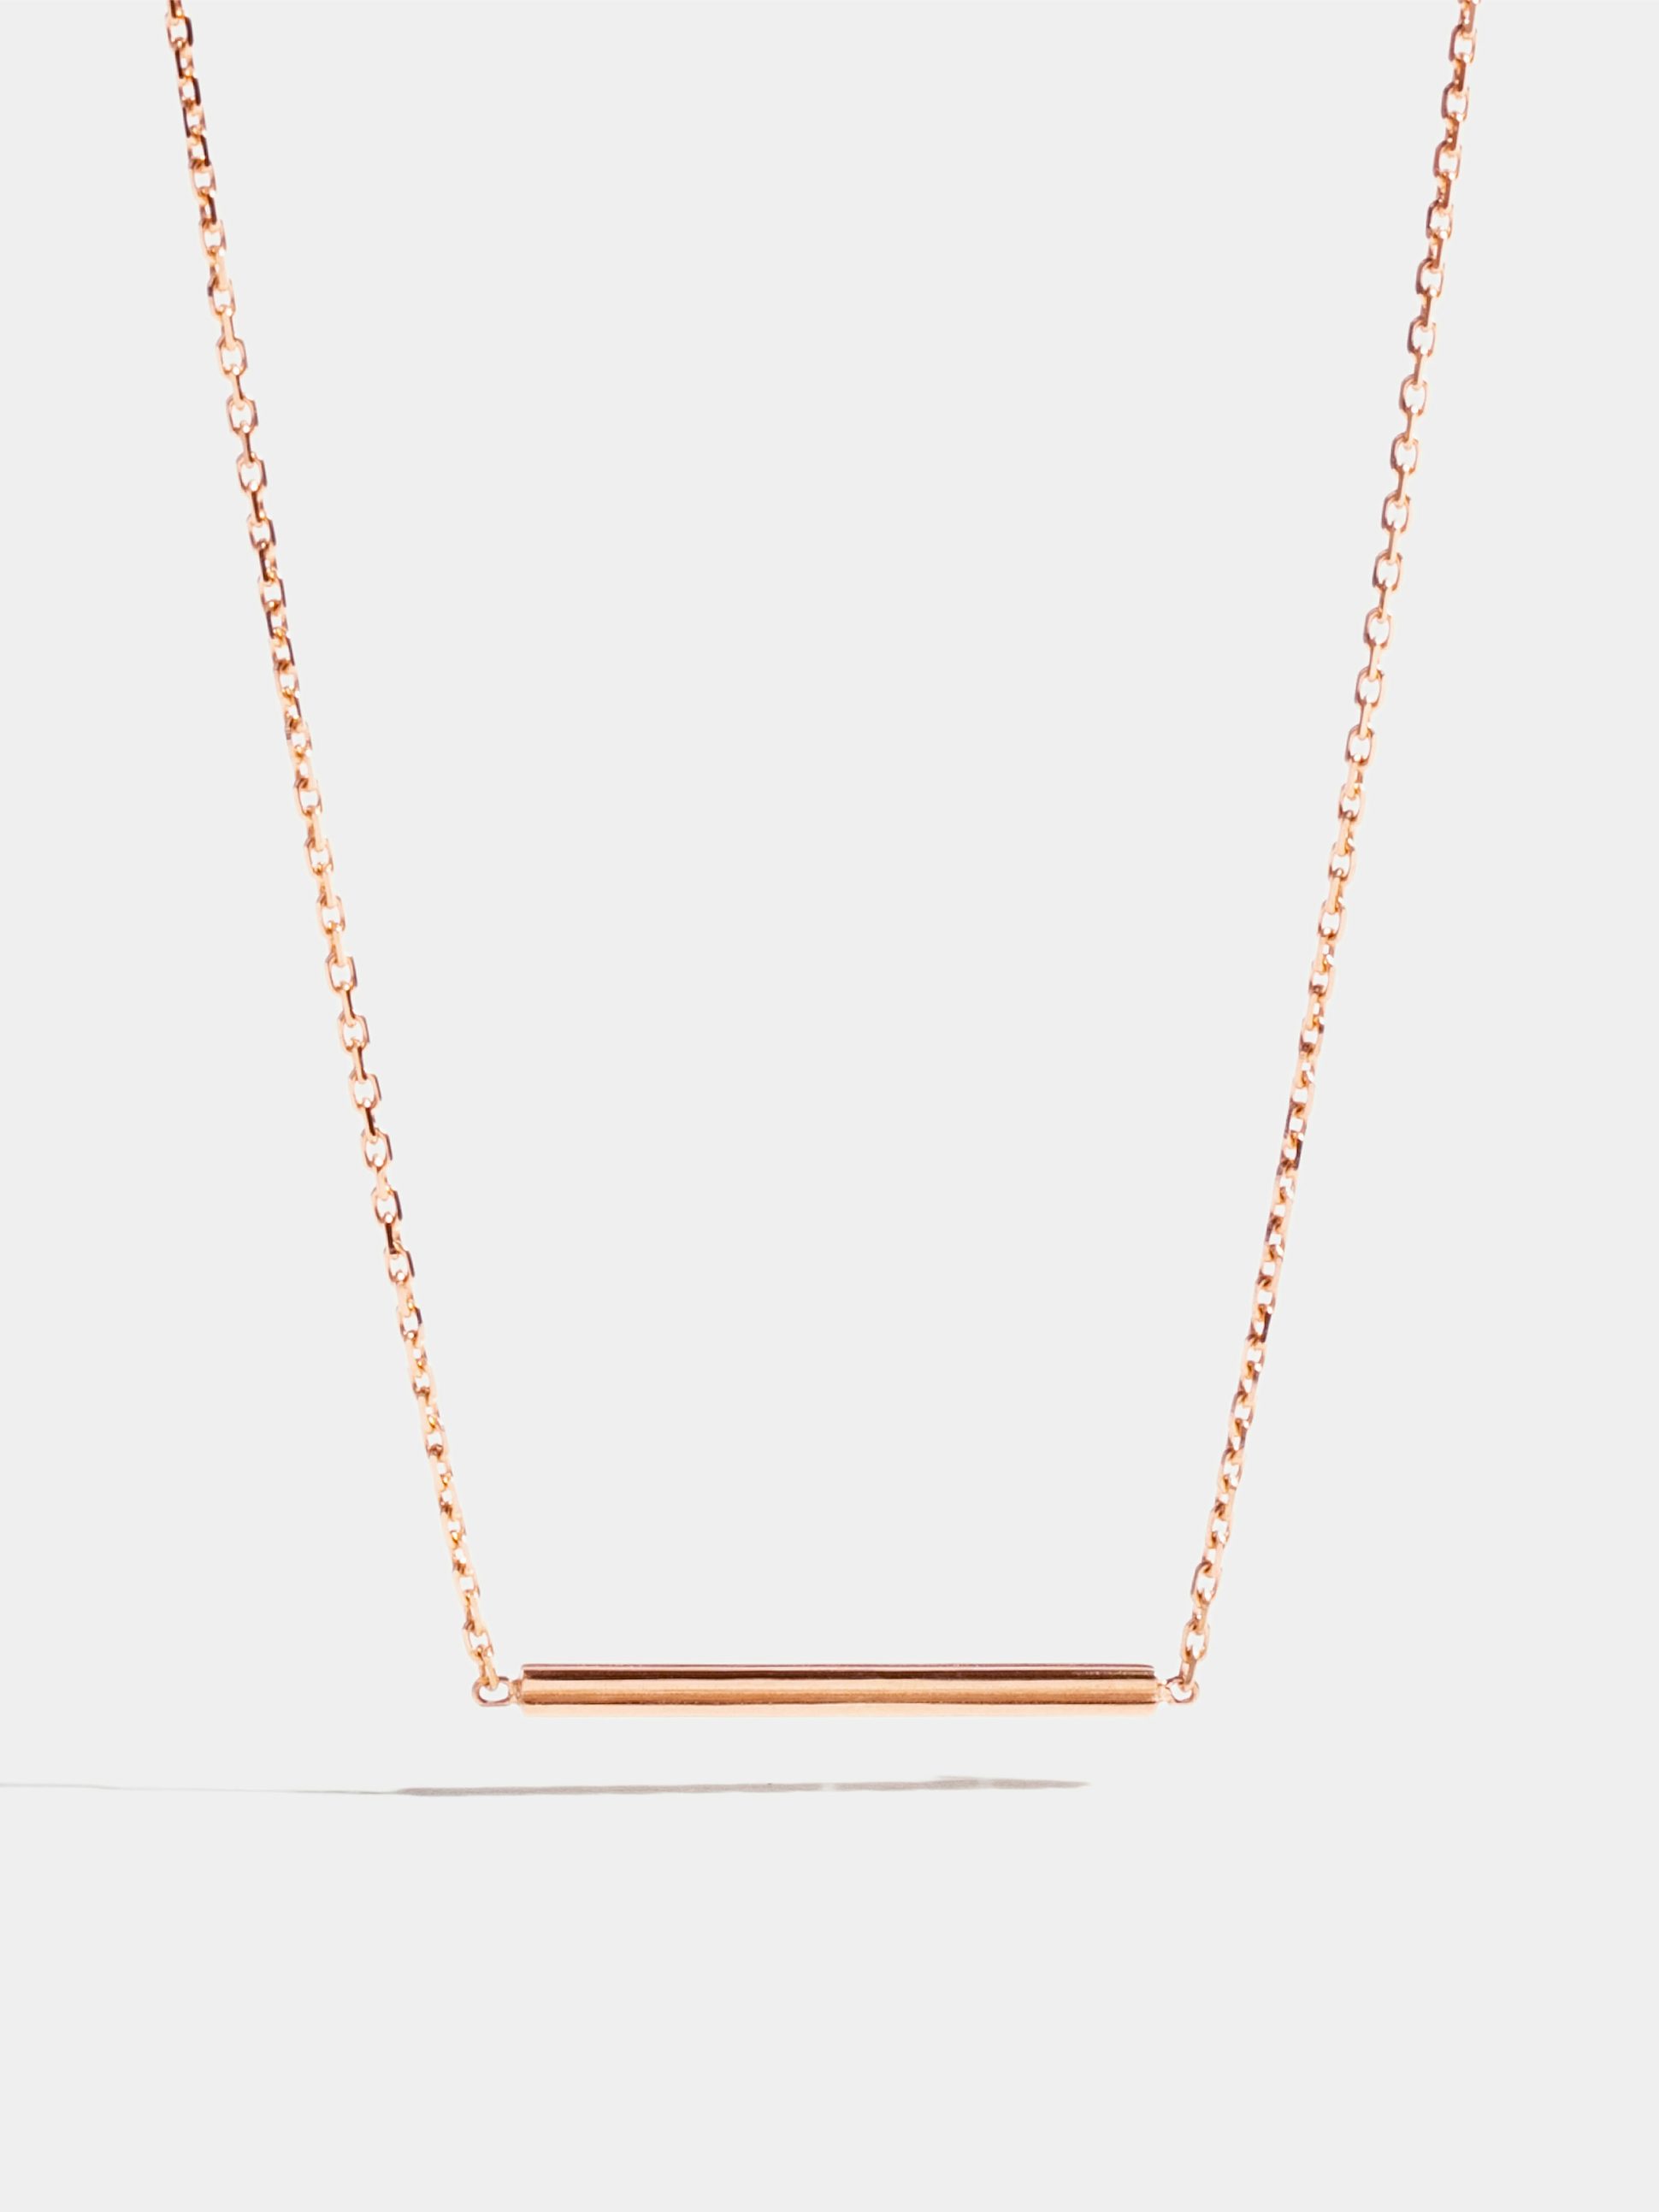 Anagramme "double jonc" motif in rose gold 18k Fairmined ethical, on 42 cm chain